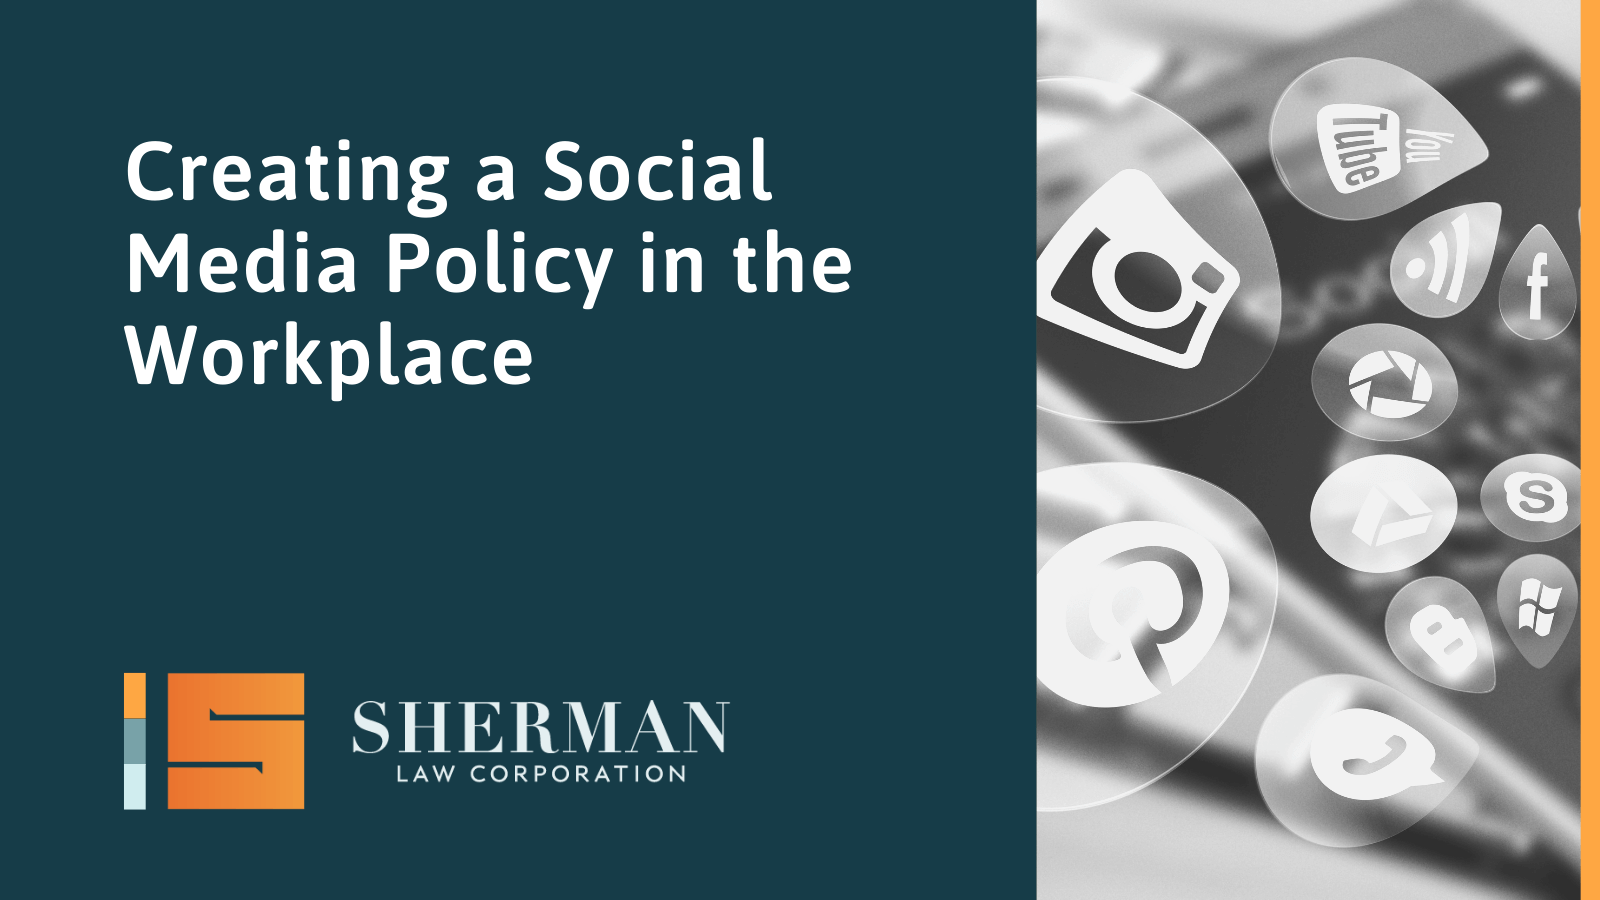 Creating a Social Media Policy in the Workplace - sherman law corporation